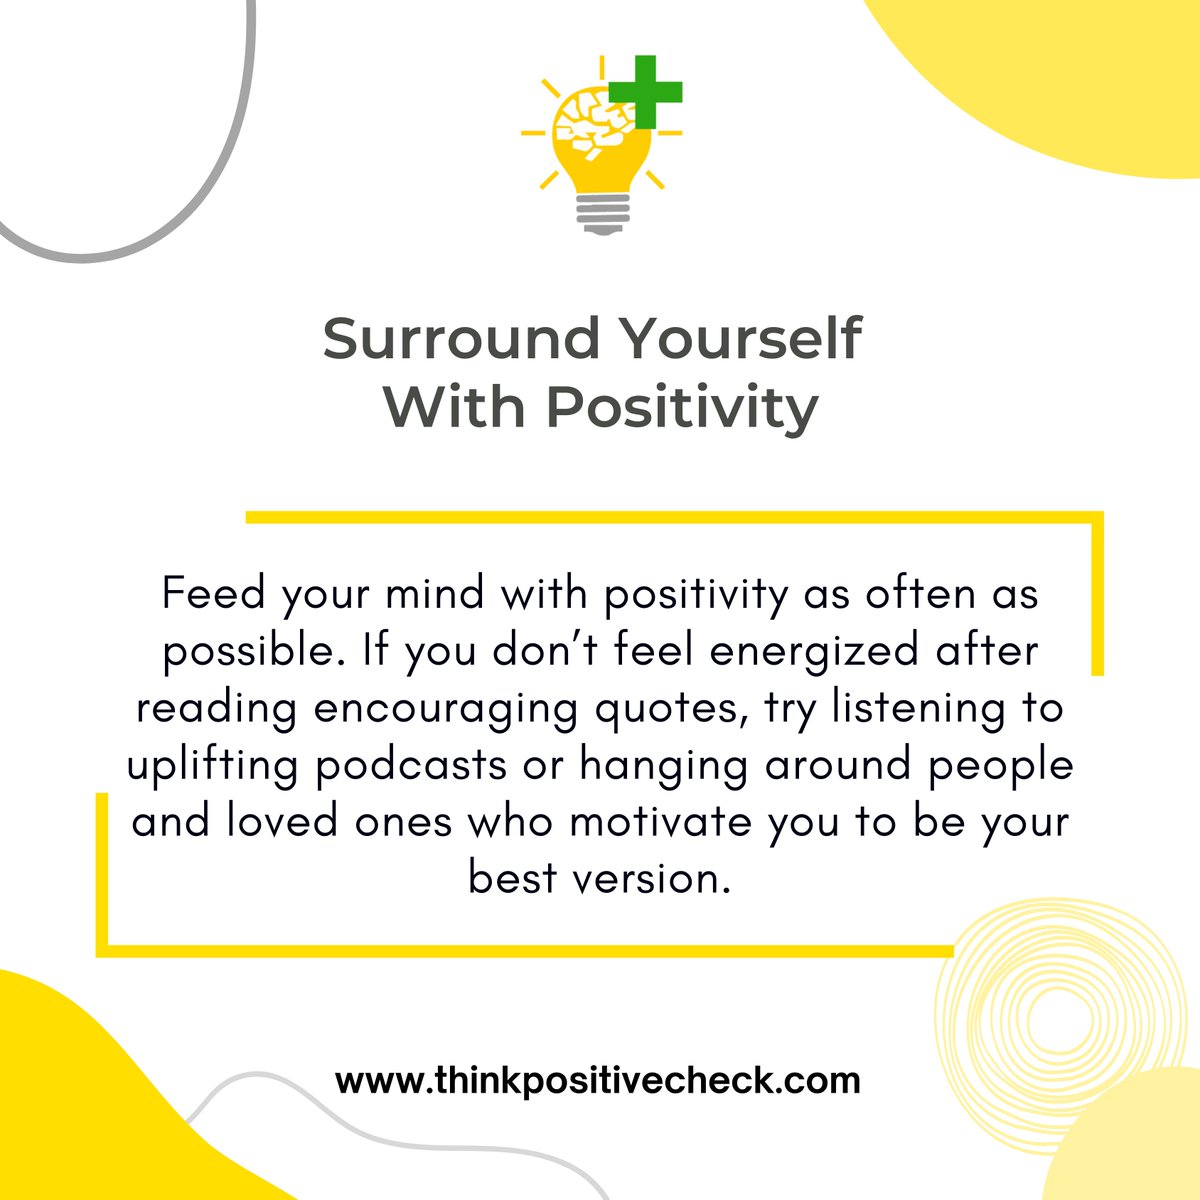 📌Surround Yourself With Positivity
👇 Learn more:
buff.ly/43Bico1

.
.
.
#thinkpositivecheck #positivemotivation #successforlife #happyquotes #spiritualvibes #lifeforhappy #motivationalquotes #motivation #quotes #inspiration #mindset #believe #positivevibes